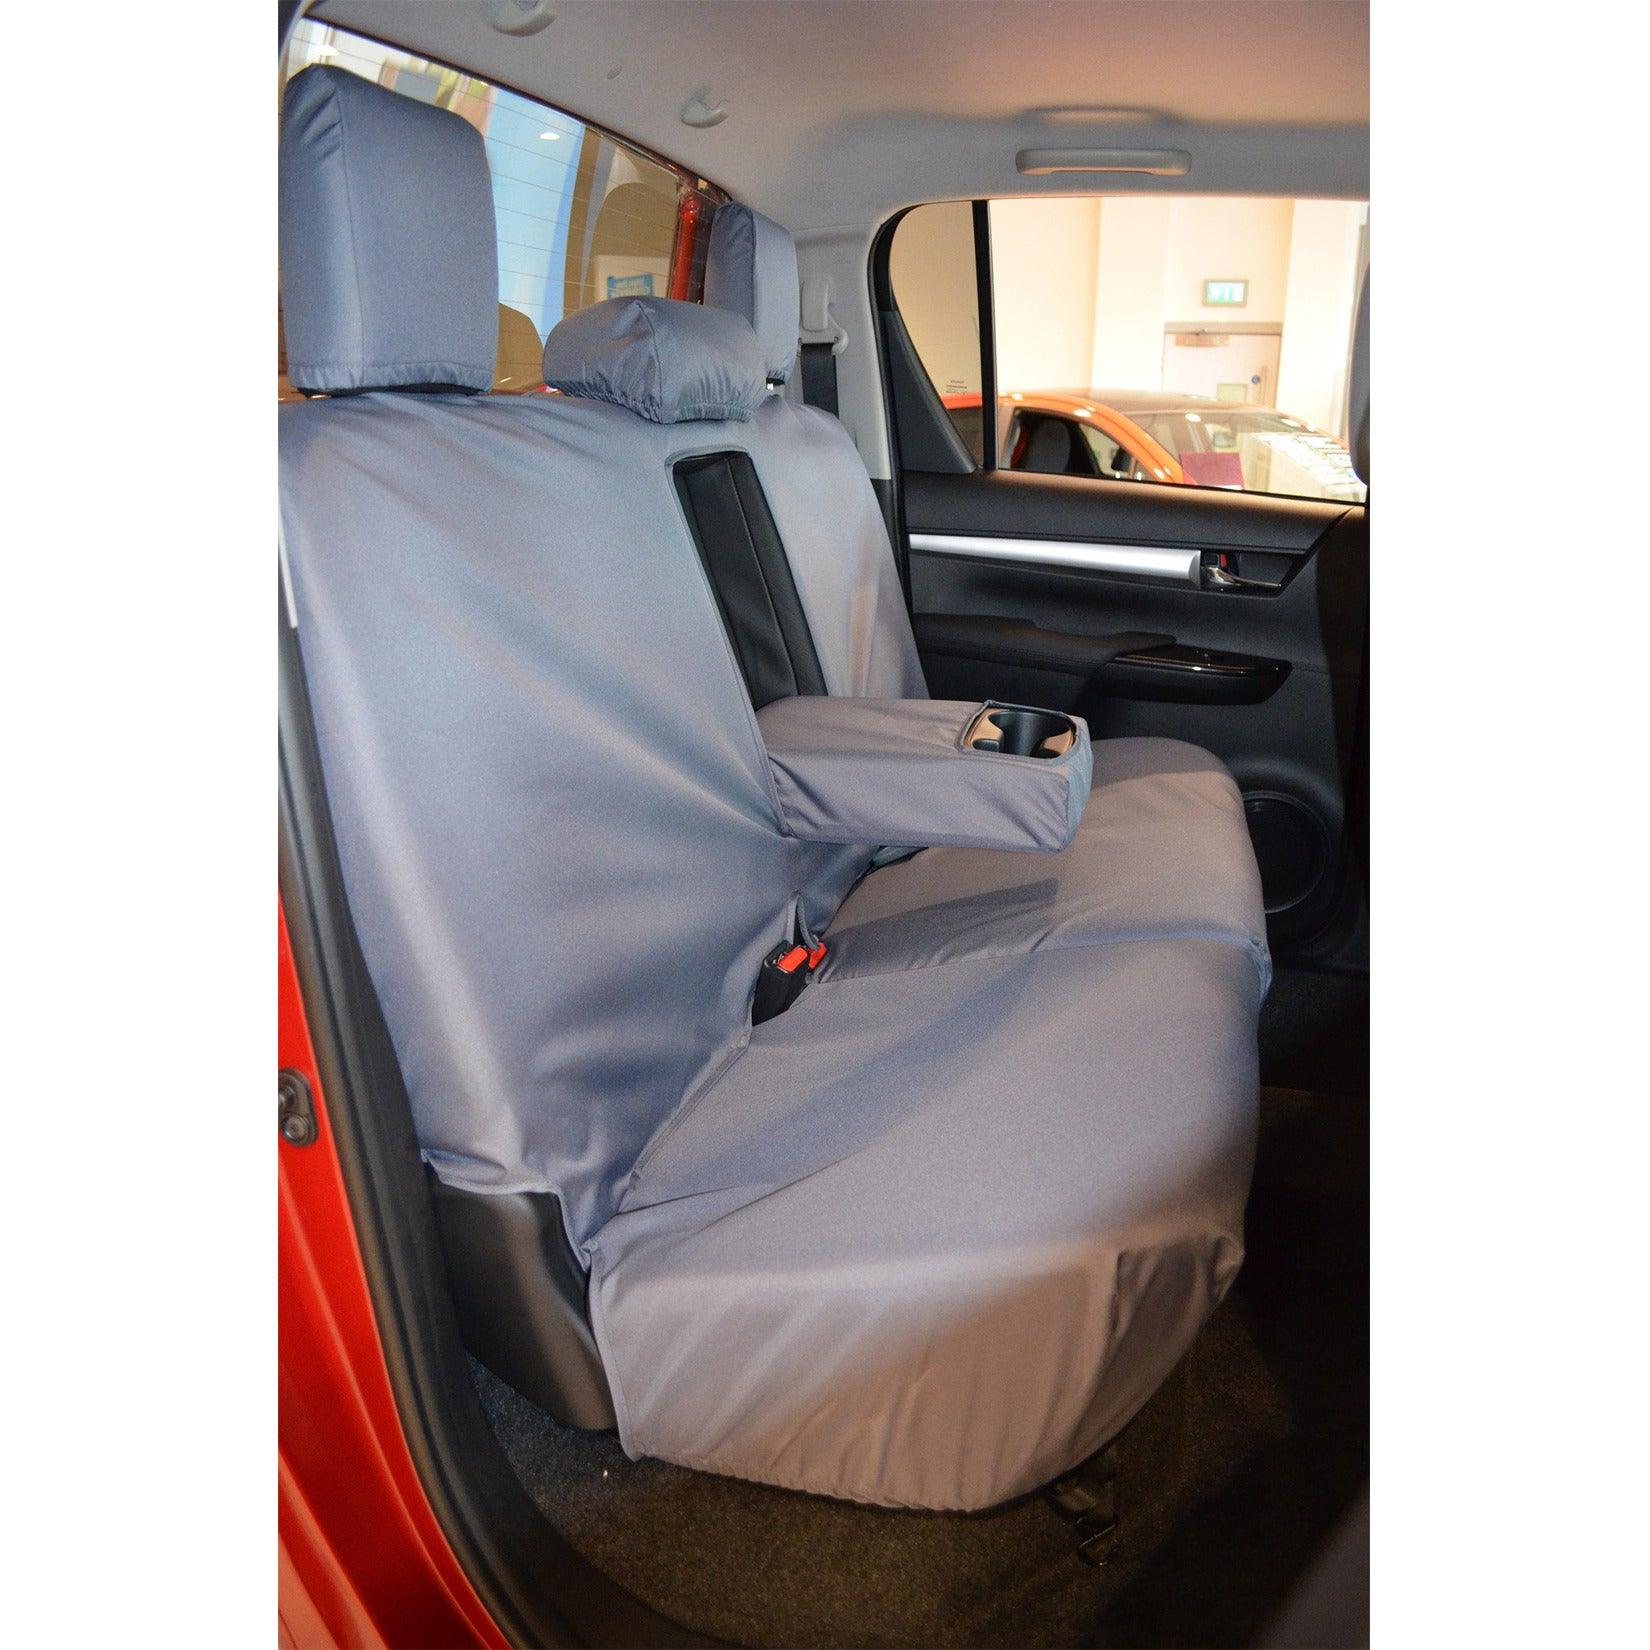 TOYOTA HILUX MK8 & MK9 INVINCIBLE 2016 ON - DOUBLE CAB REAR SEAT COVERS - GREY - Storm Xccessories2